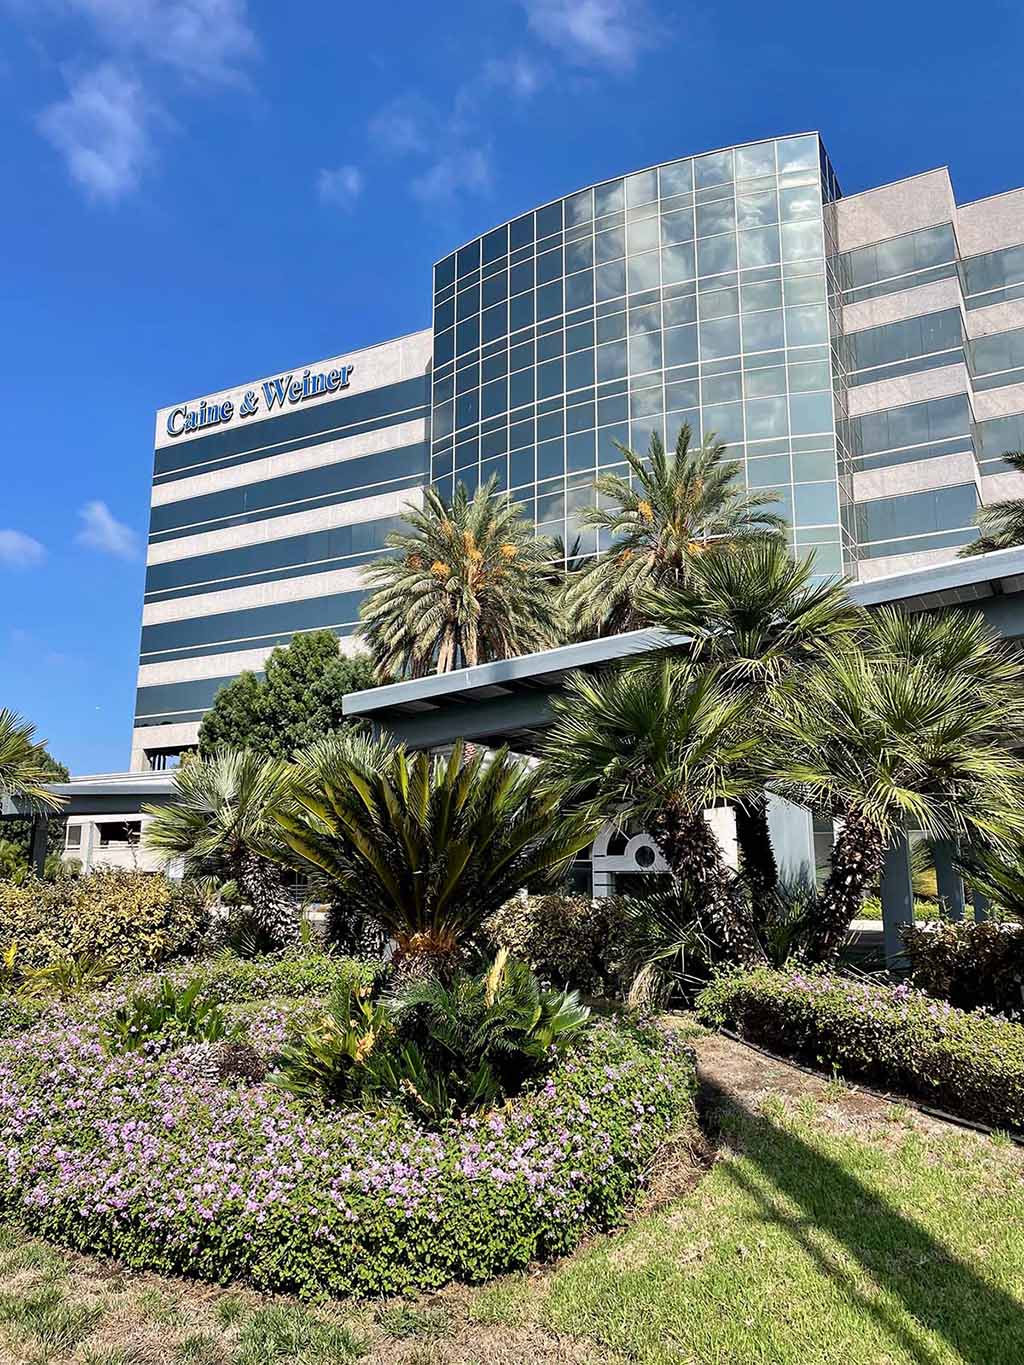 Southern California Multi-Specialty Center serves patients from Santa Monica